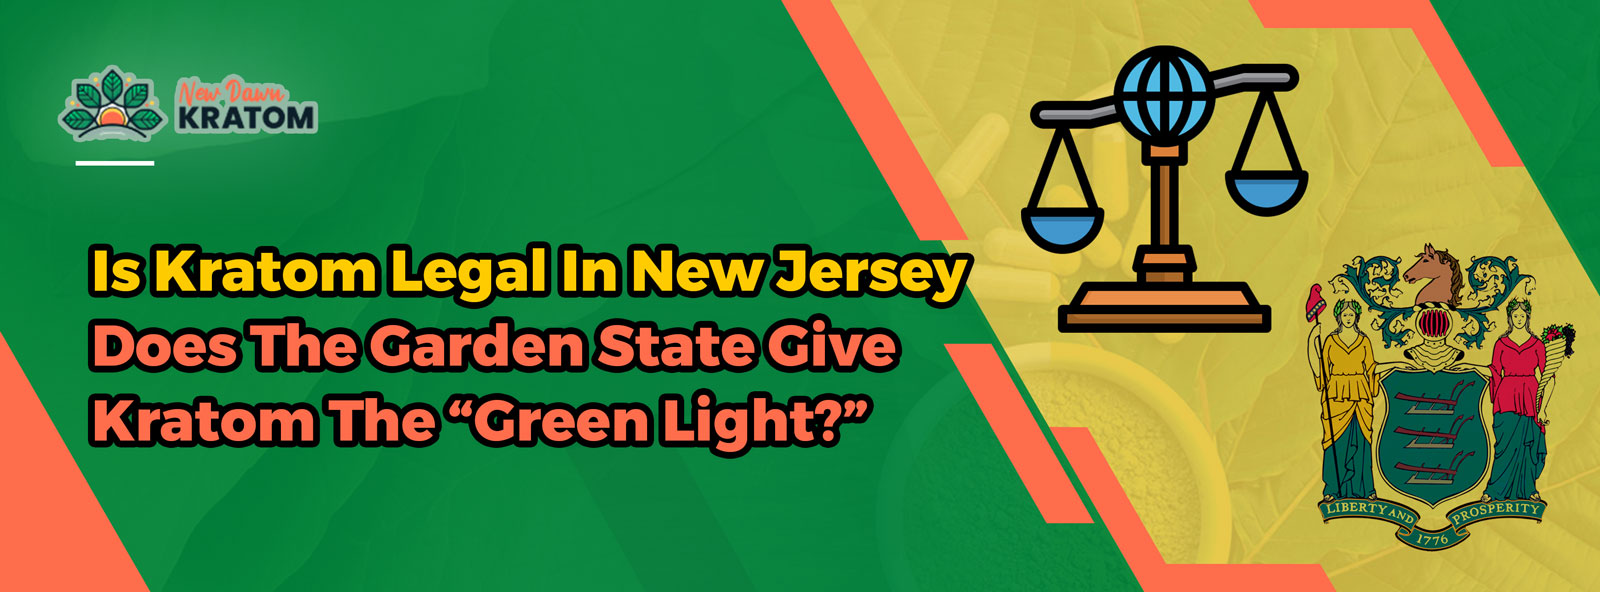 is kratom legal in new jersey : does the garden state give kratom the “green light?” by